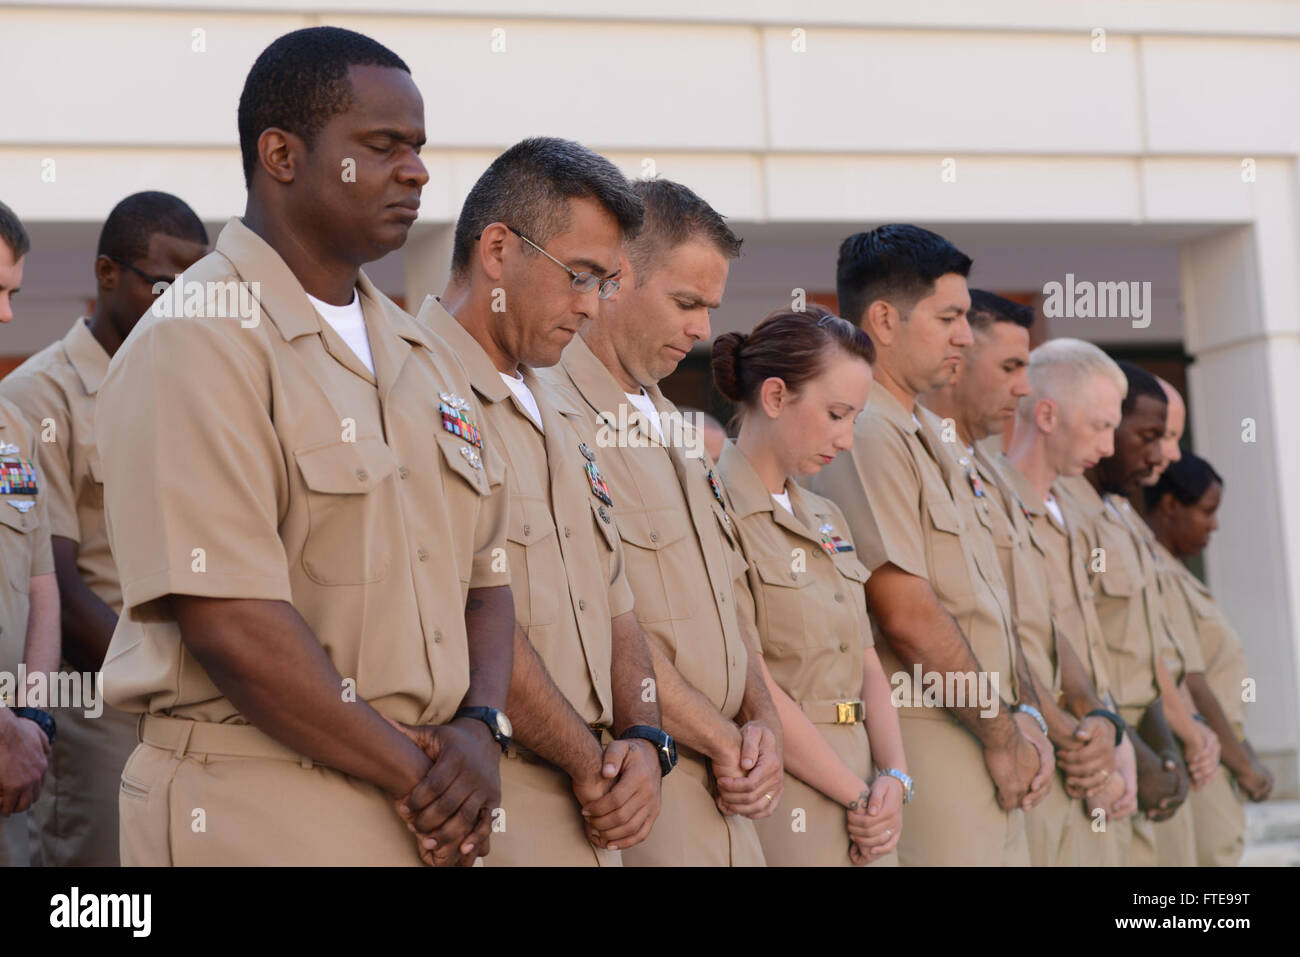 140916-N-OX801-041 NAPLES, ITALY (Sept. 16, 2014) Newly promoted chief petty officers (CPO) assigned to U.S. Naval Forces Europe-Africa/U.S. 6th Fleet stand at attention for a prayer during the CPO pinning ceremony at Naval Support Activity Naples. The ceremony honored 28 Sailors promoted to the rank of CPO, having their anchors pinned by friends, family and their new peers in the CPO Mess. (U.S. Navy photo by Mass Communication Specialist 3rd Class Daniel Schumacher/RELEASED) Stock Photo